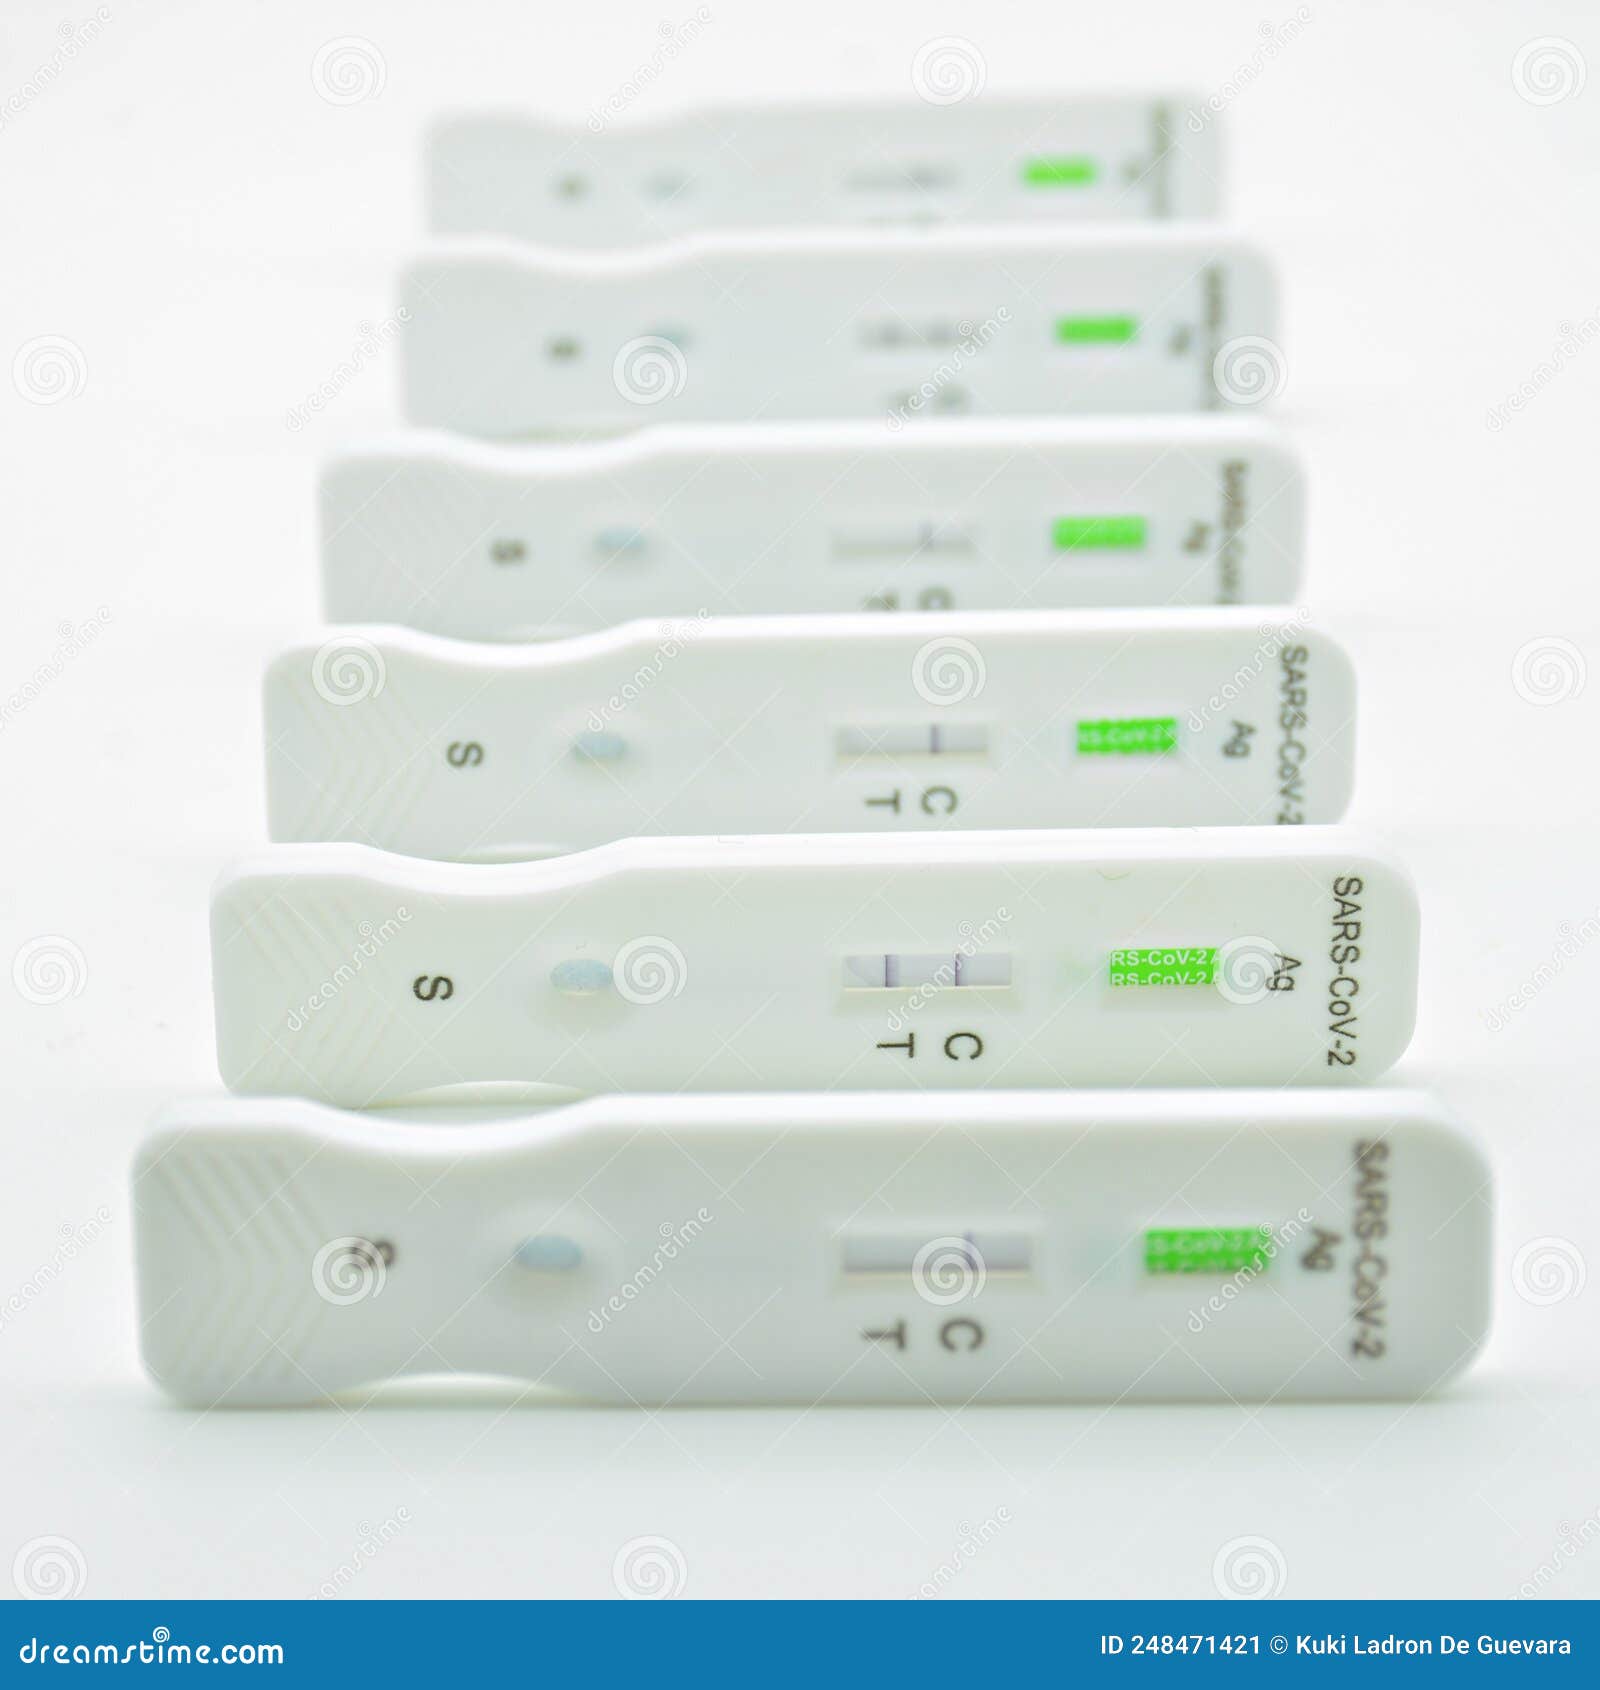 several antigen tests arranged in a row